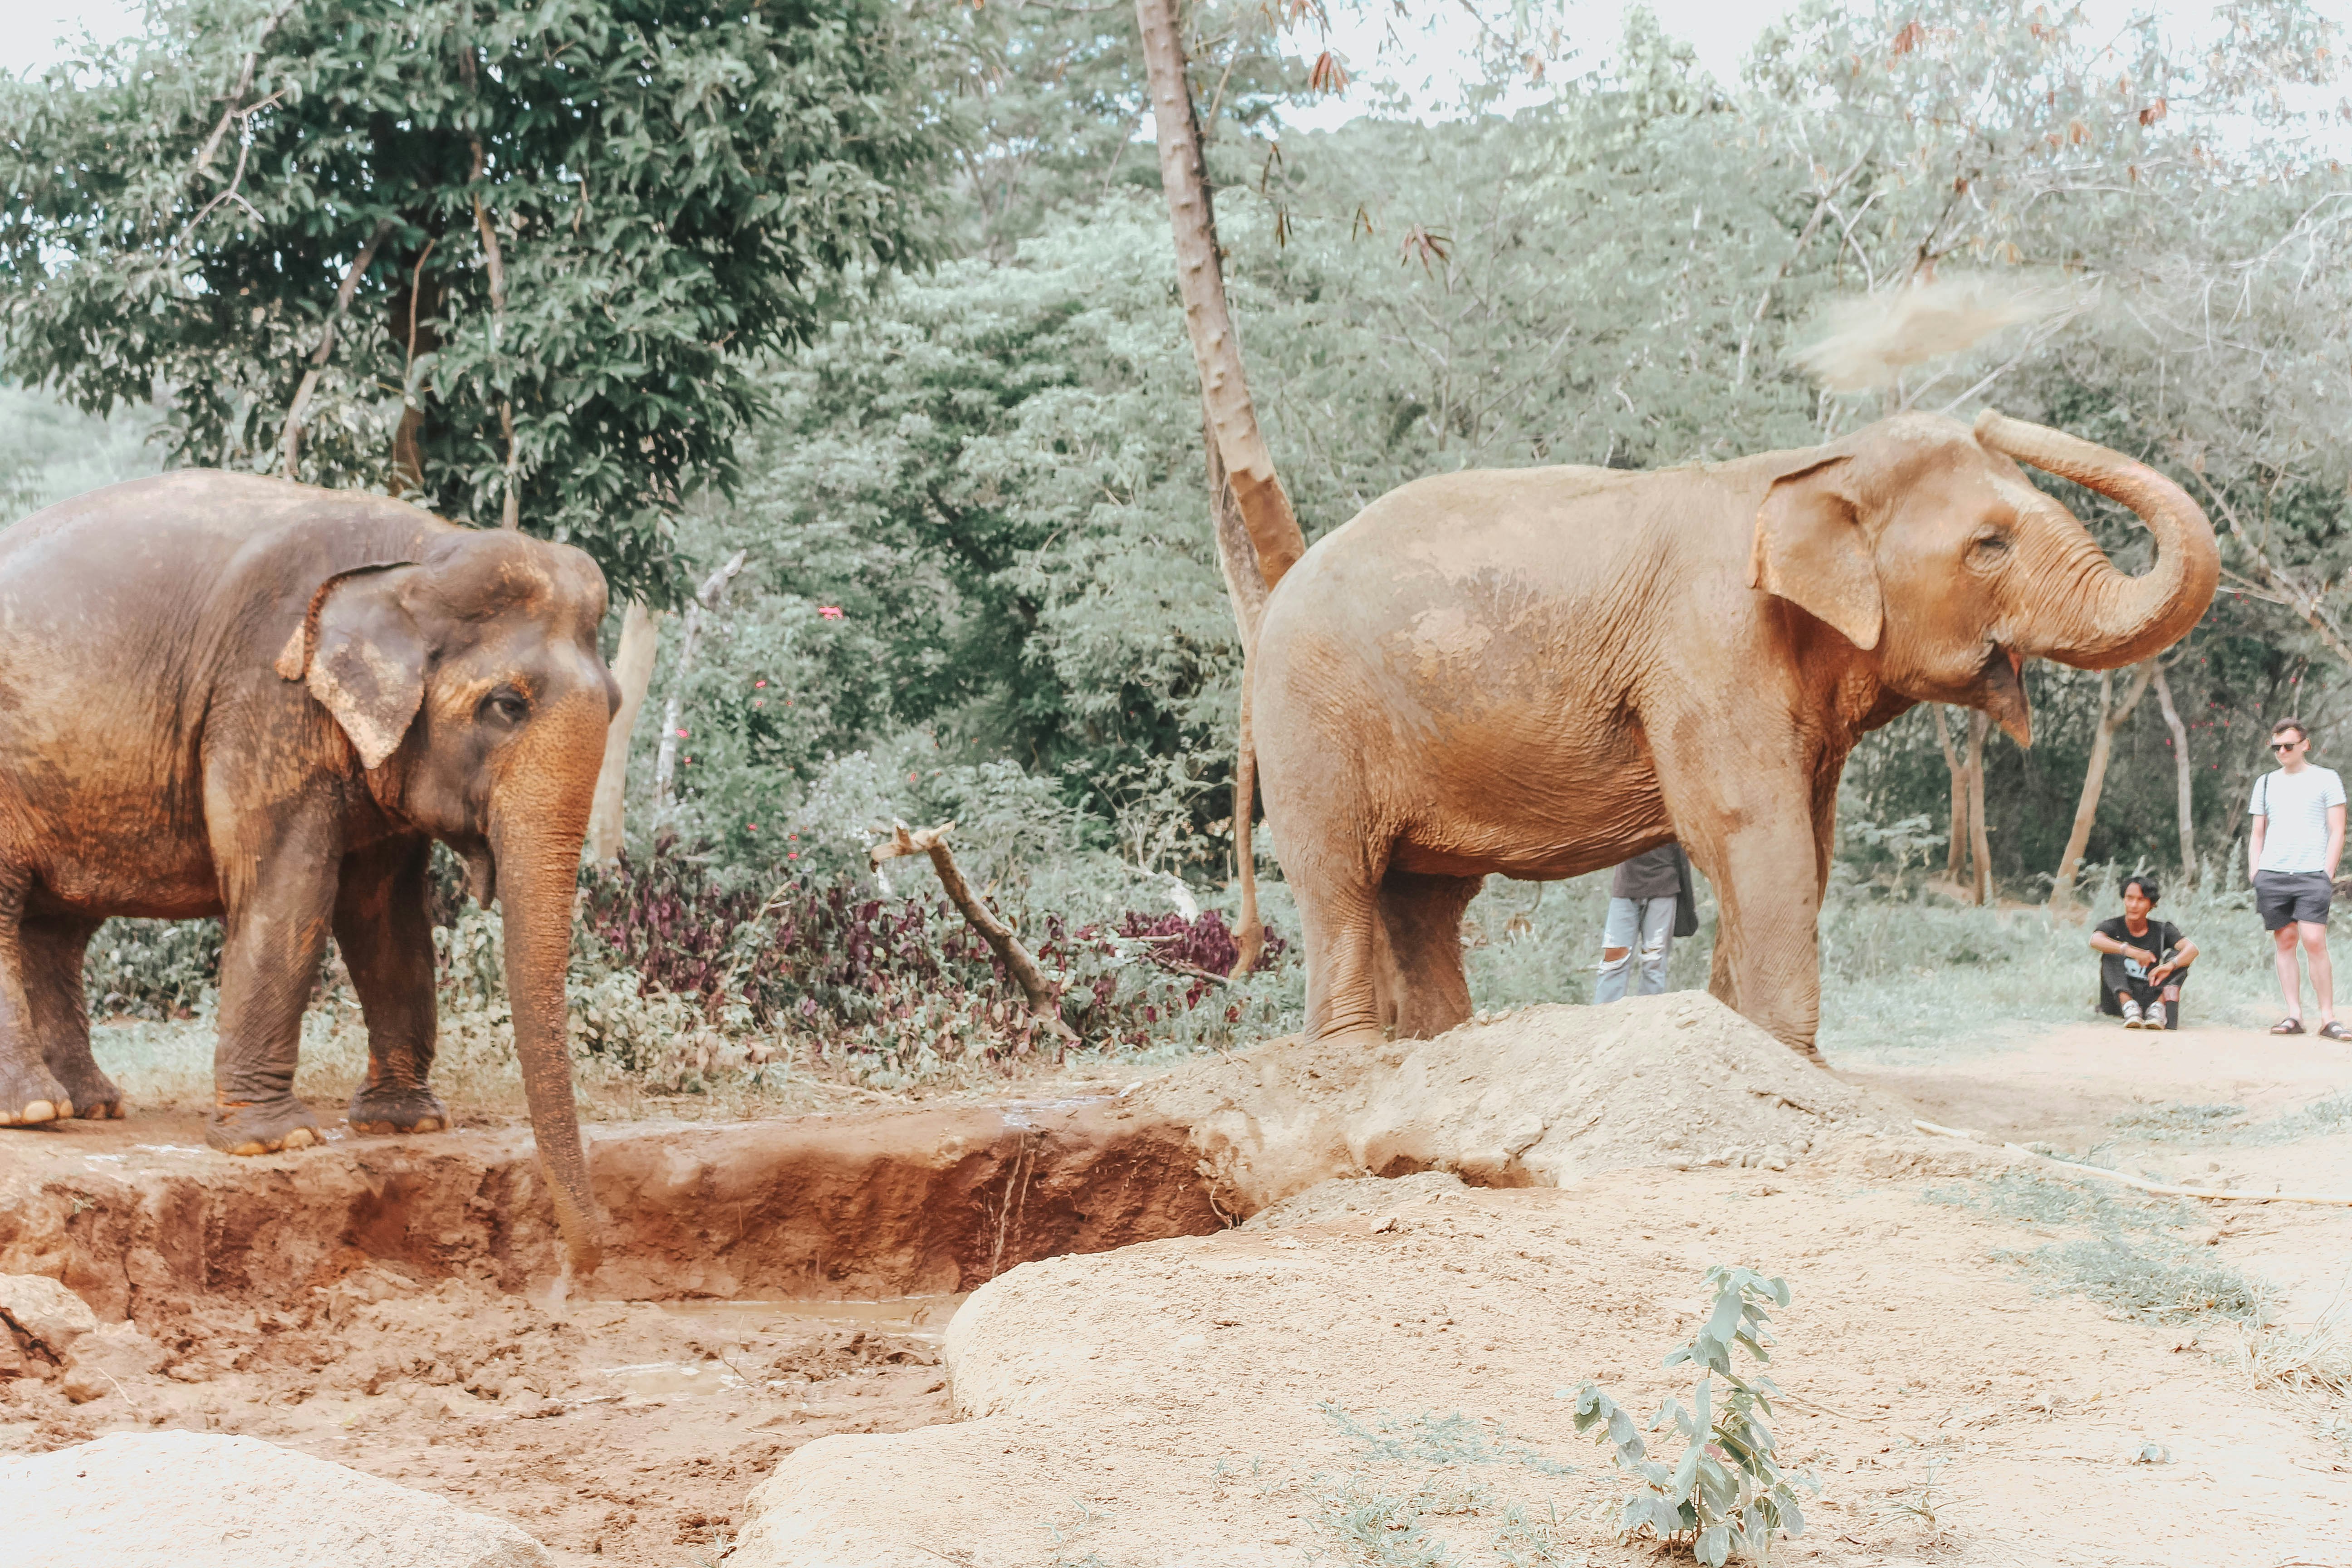 Two elephants are giving themselves a dust bath at Samui Elephant Sanctuary amid dense, lush forest.